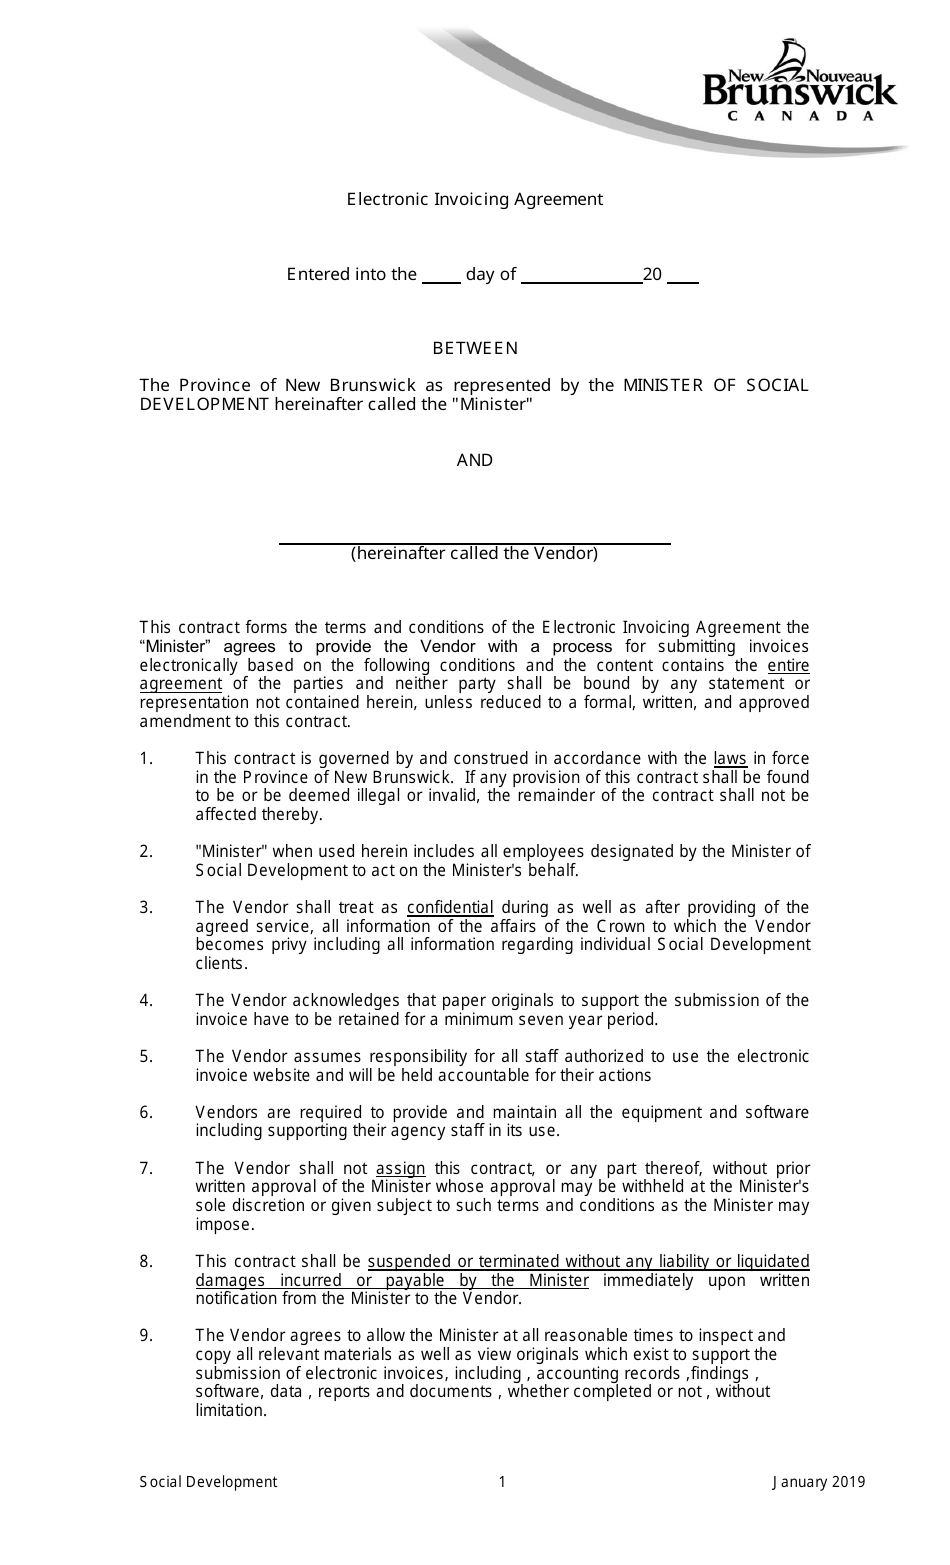 Electronic Invoicing Agreement - New Brunswick, Canada, Page 1